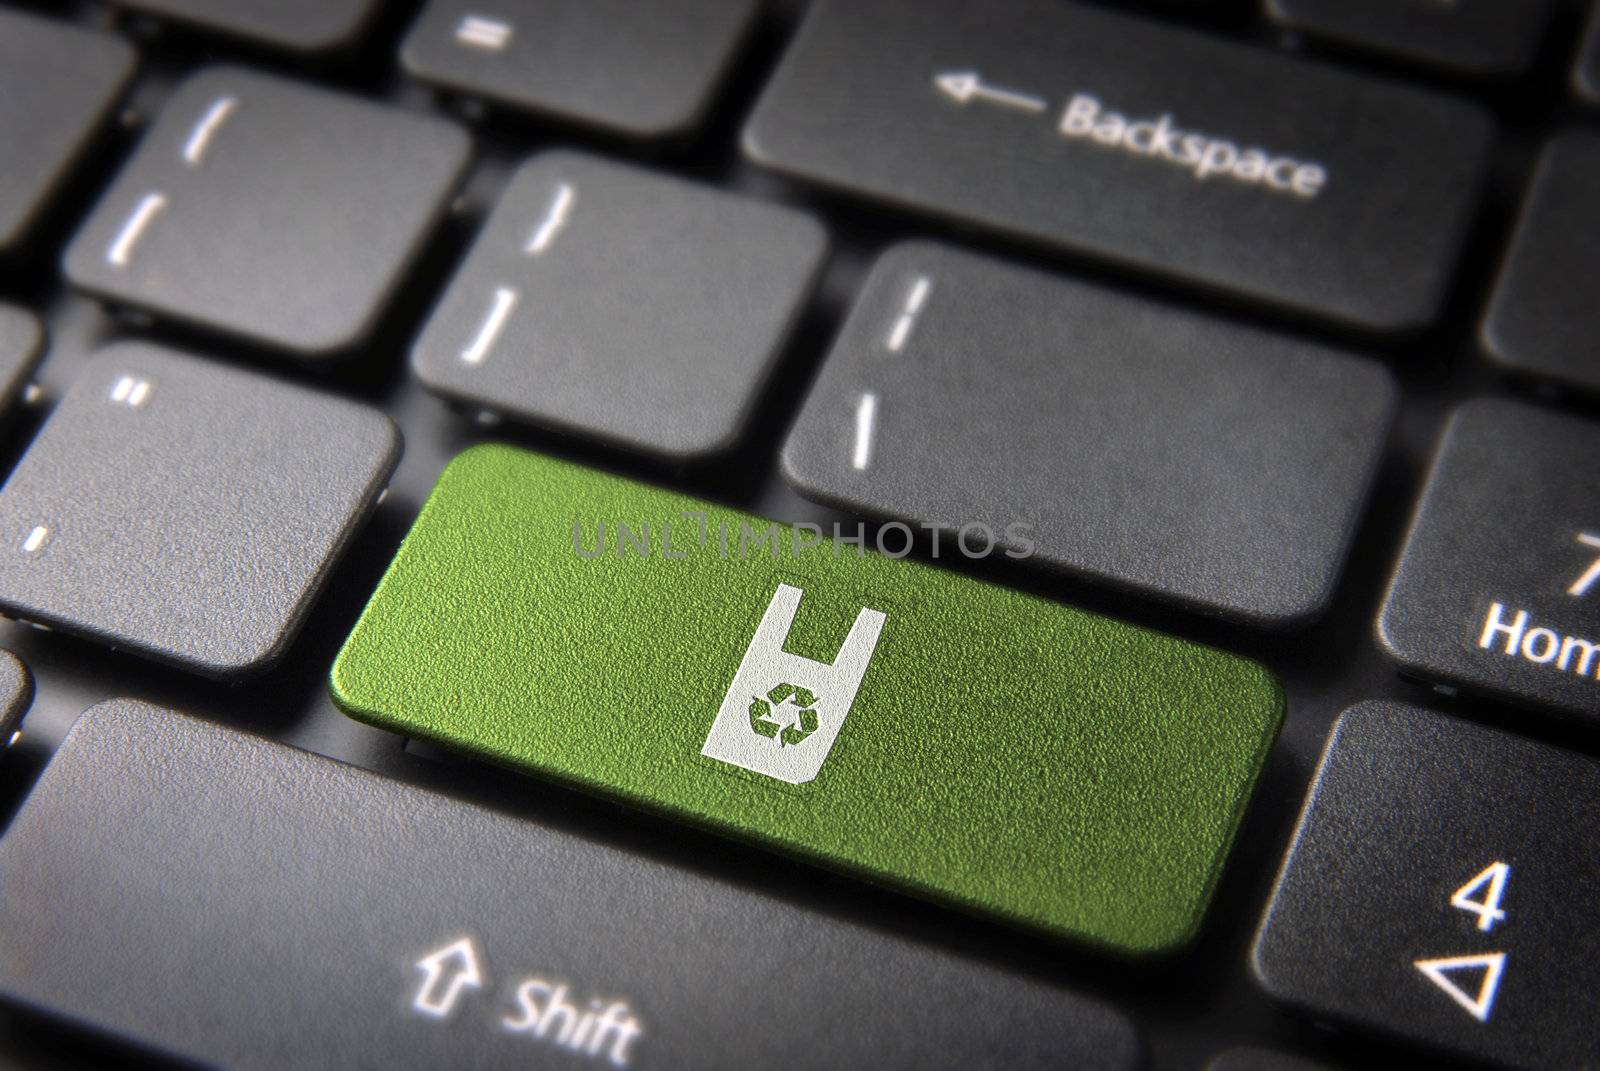 Go green key with recycle plastic bag icon on laptop keyboard. Included clipping path, so you can easily edit it.